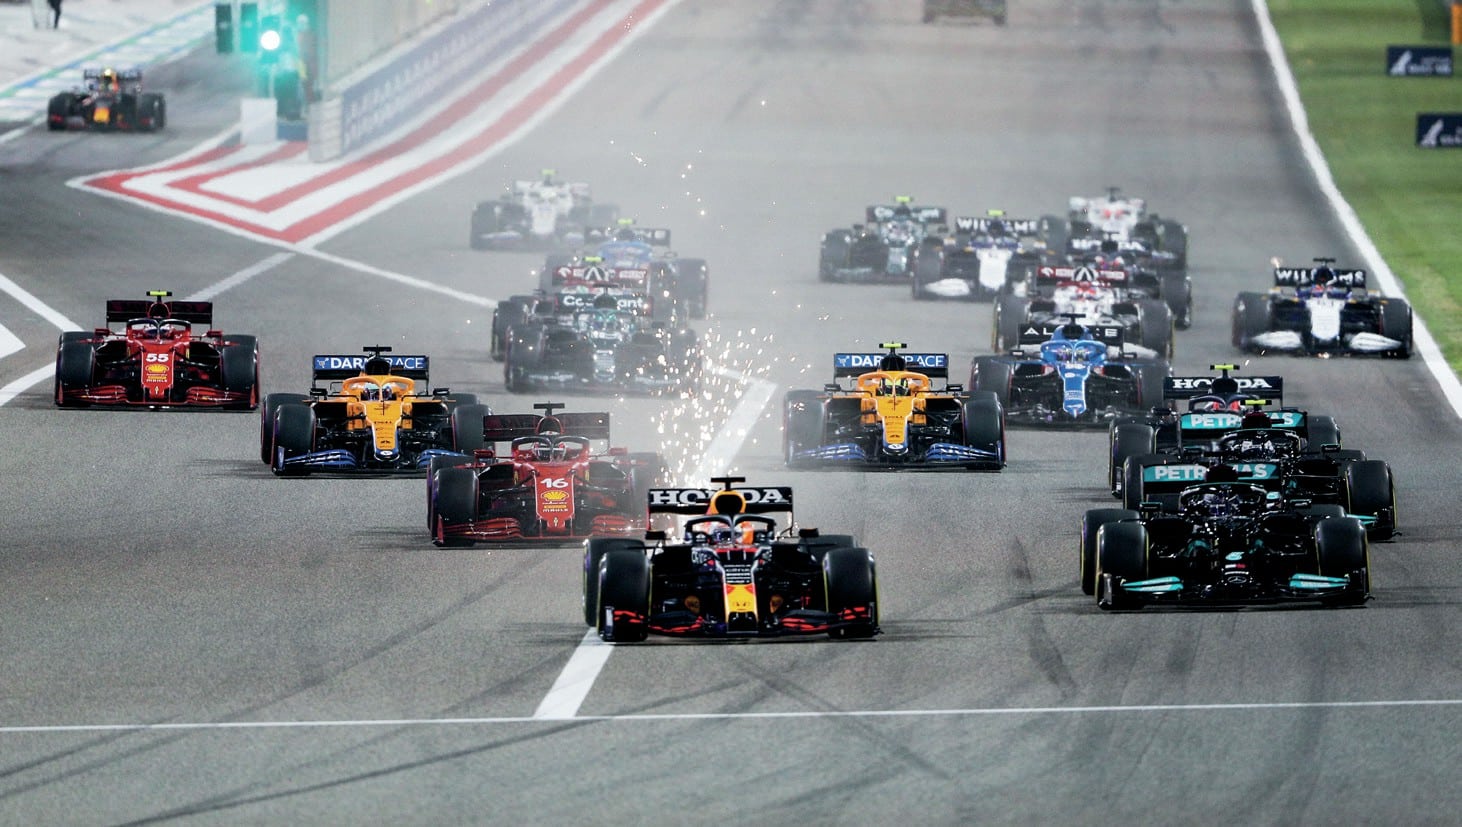 Max Verstappen leads at the start of the 2021 Bahrain Grand Prix